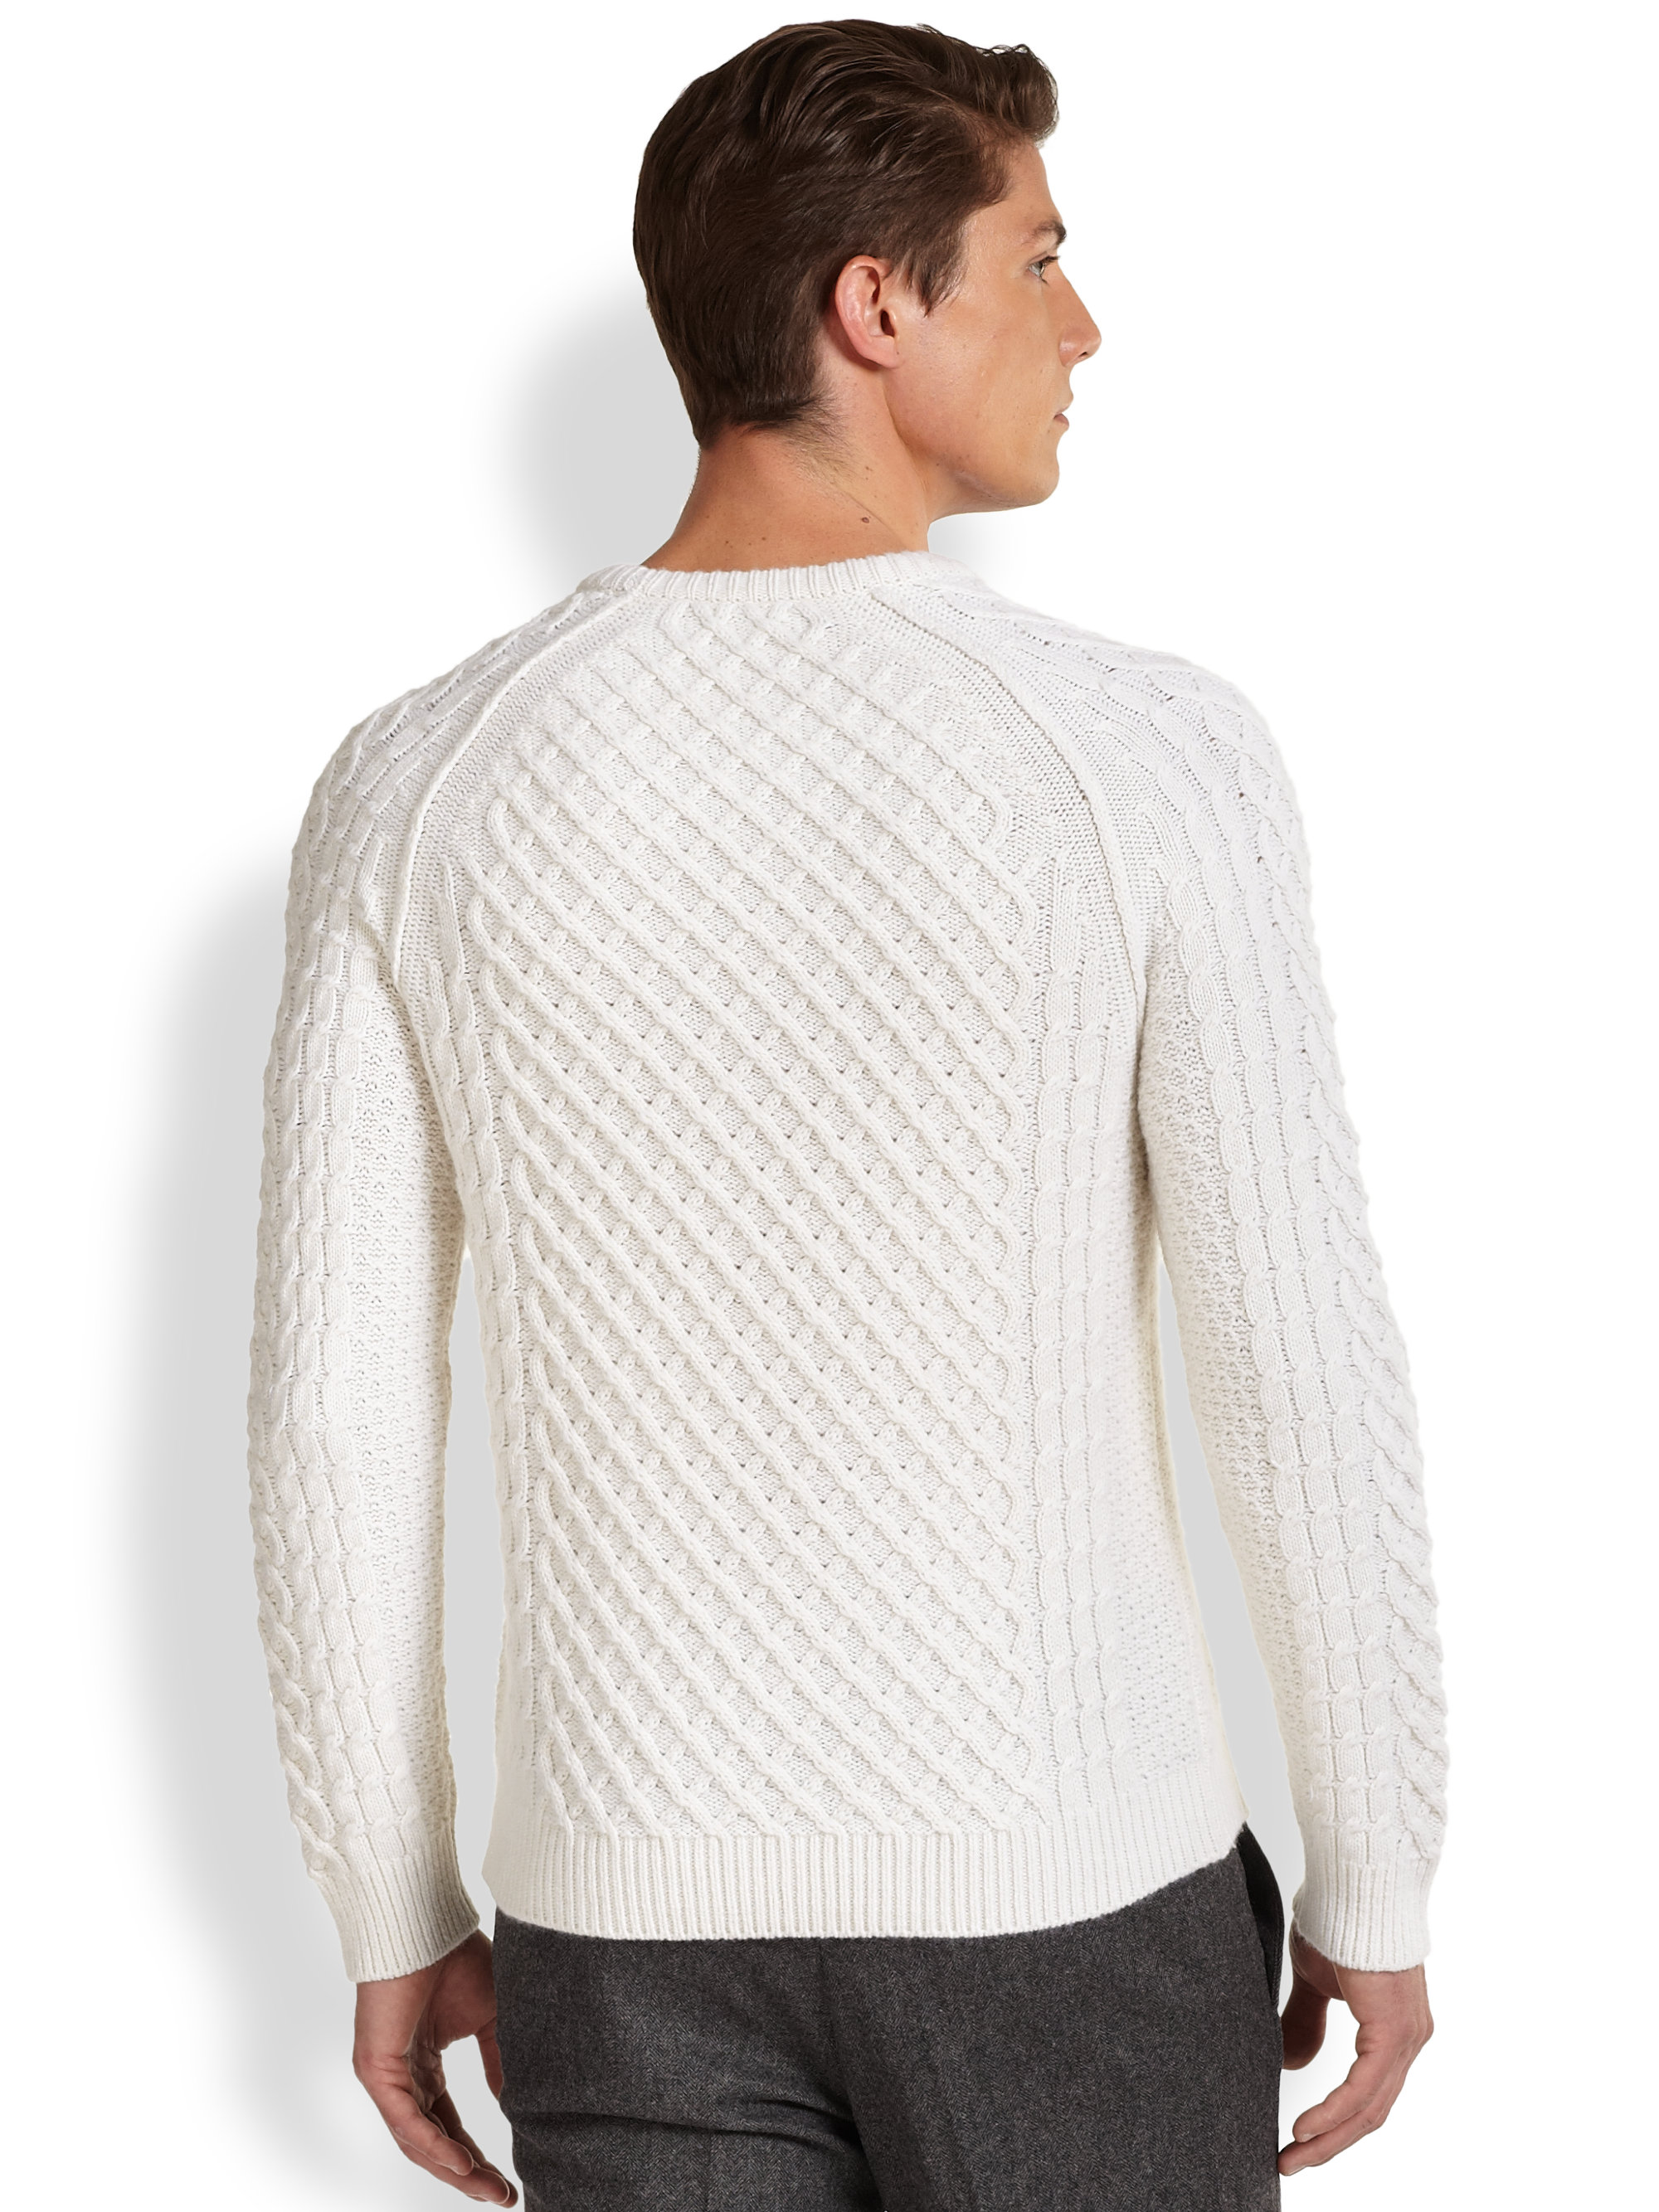 Vince Cashmere Wool Cableknit Sweater in White for Men - Lyst